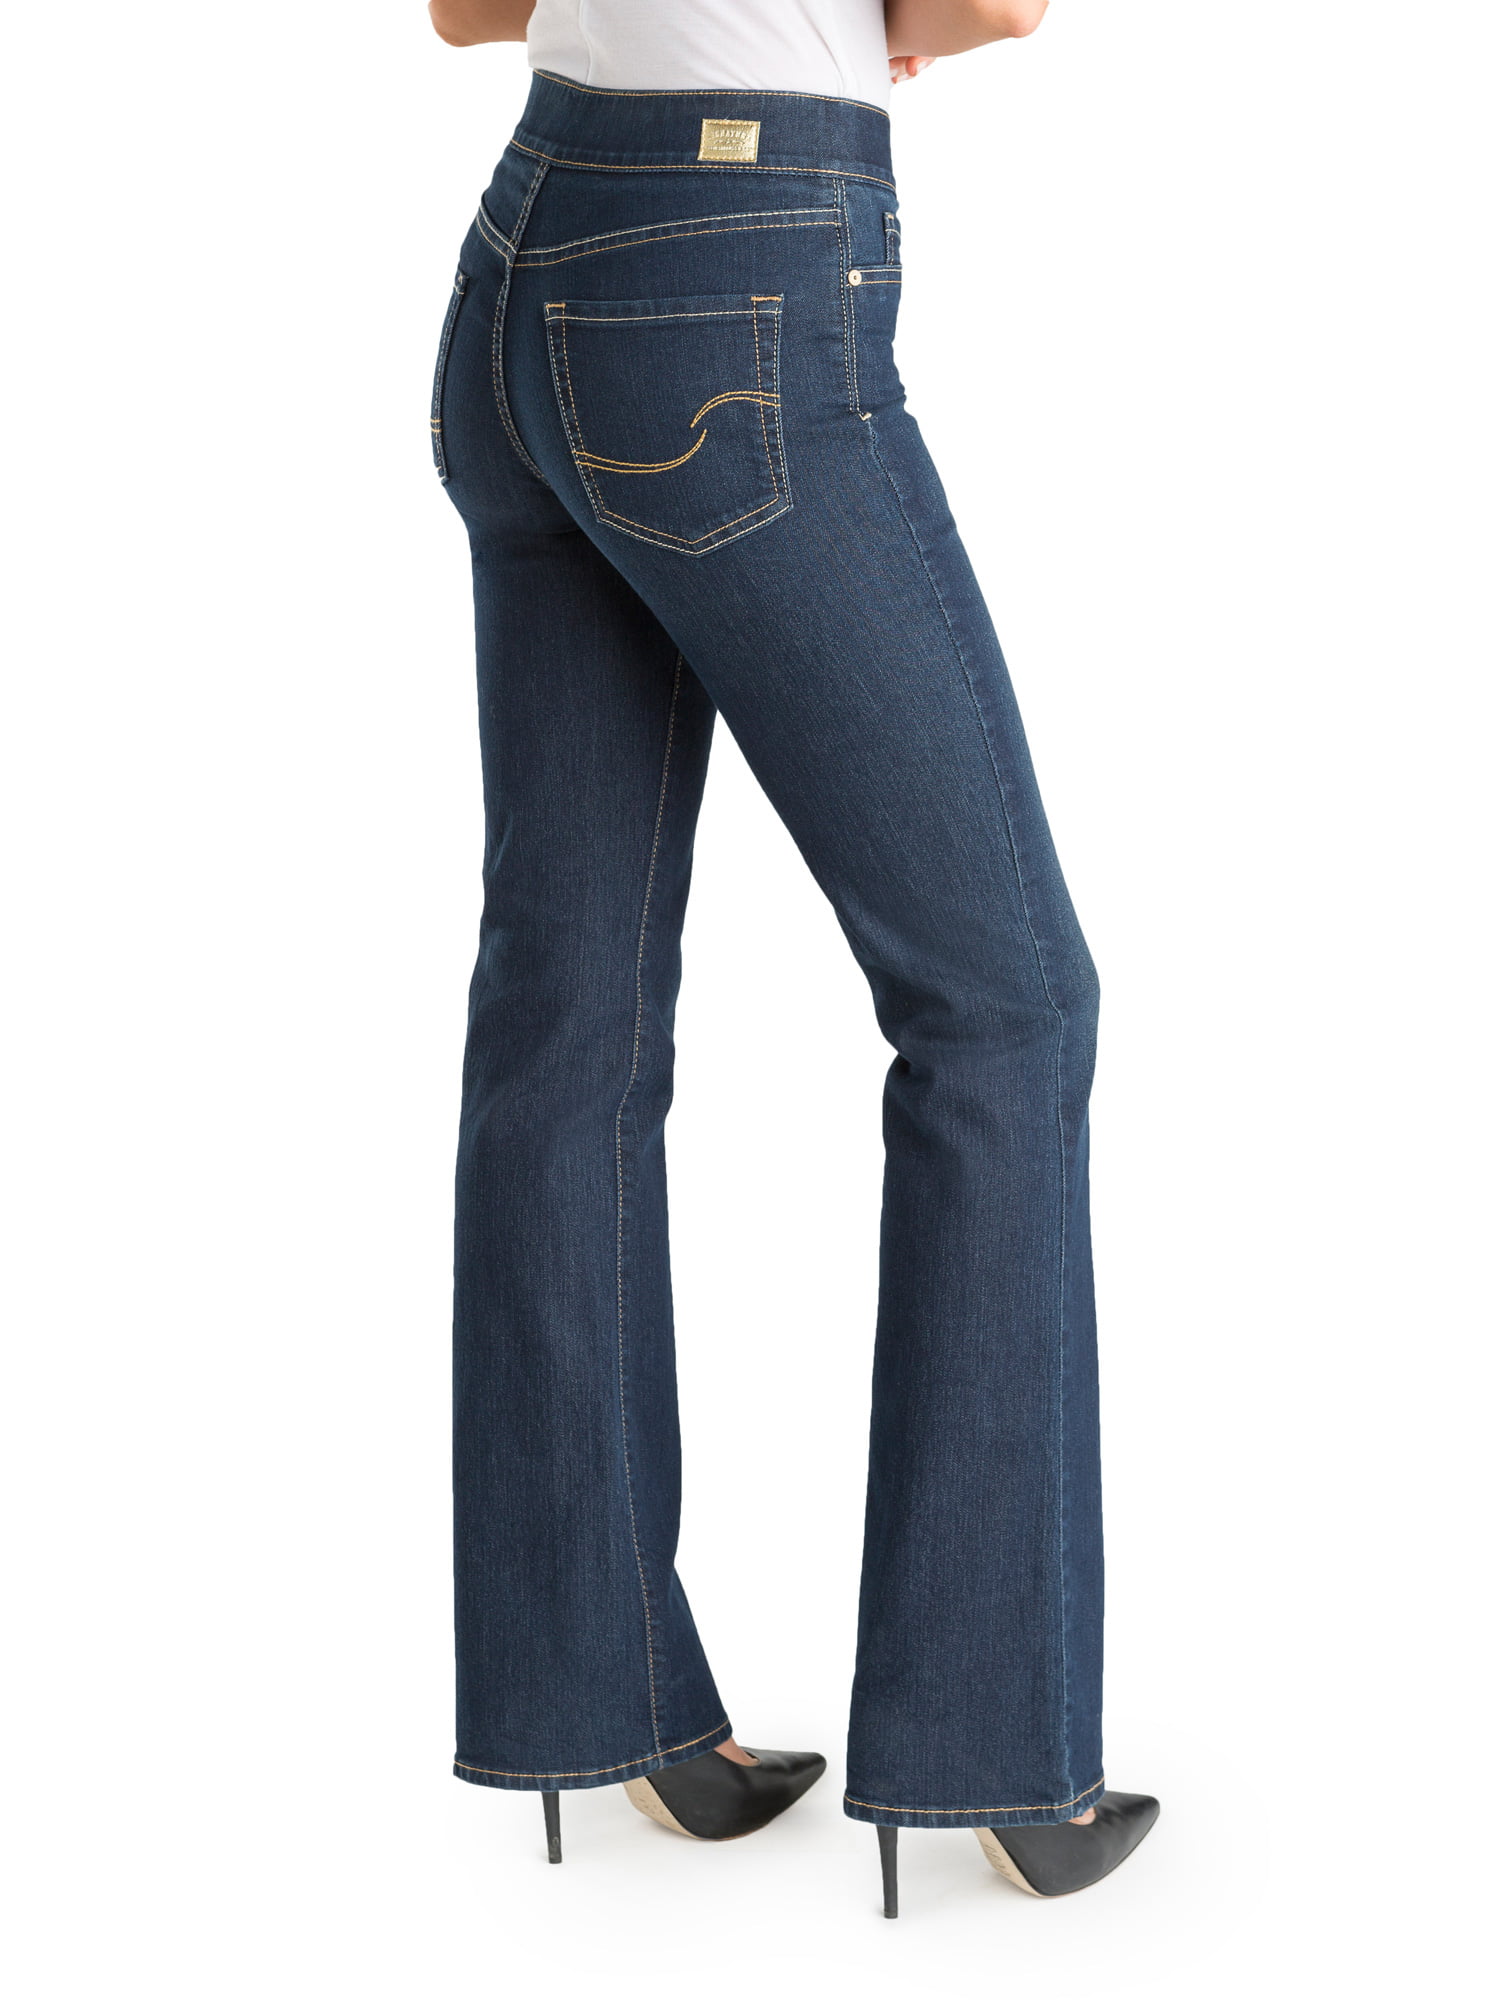 levi pull on bootcut jeans